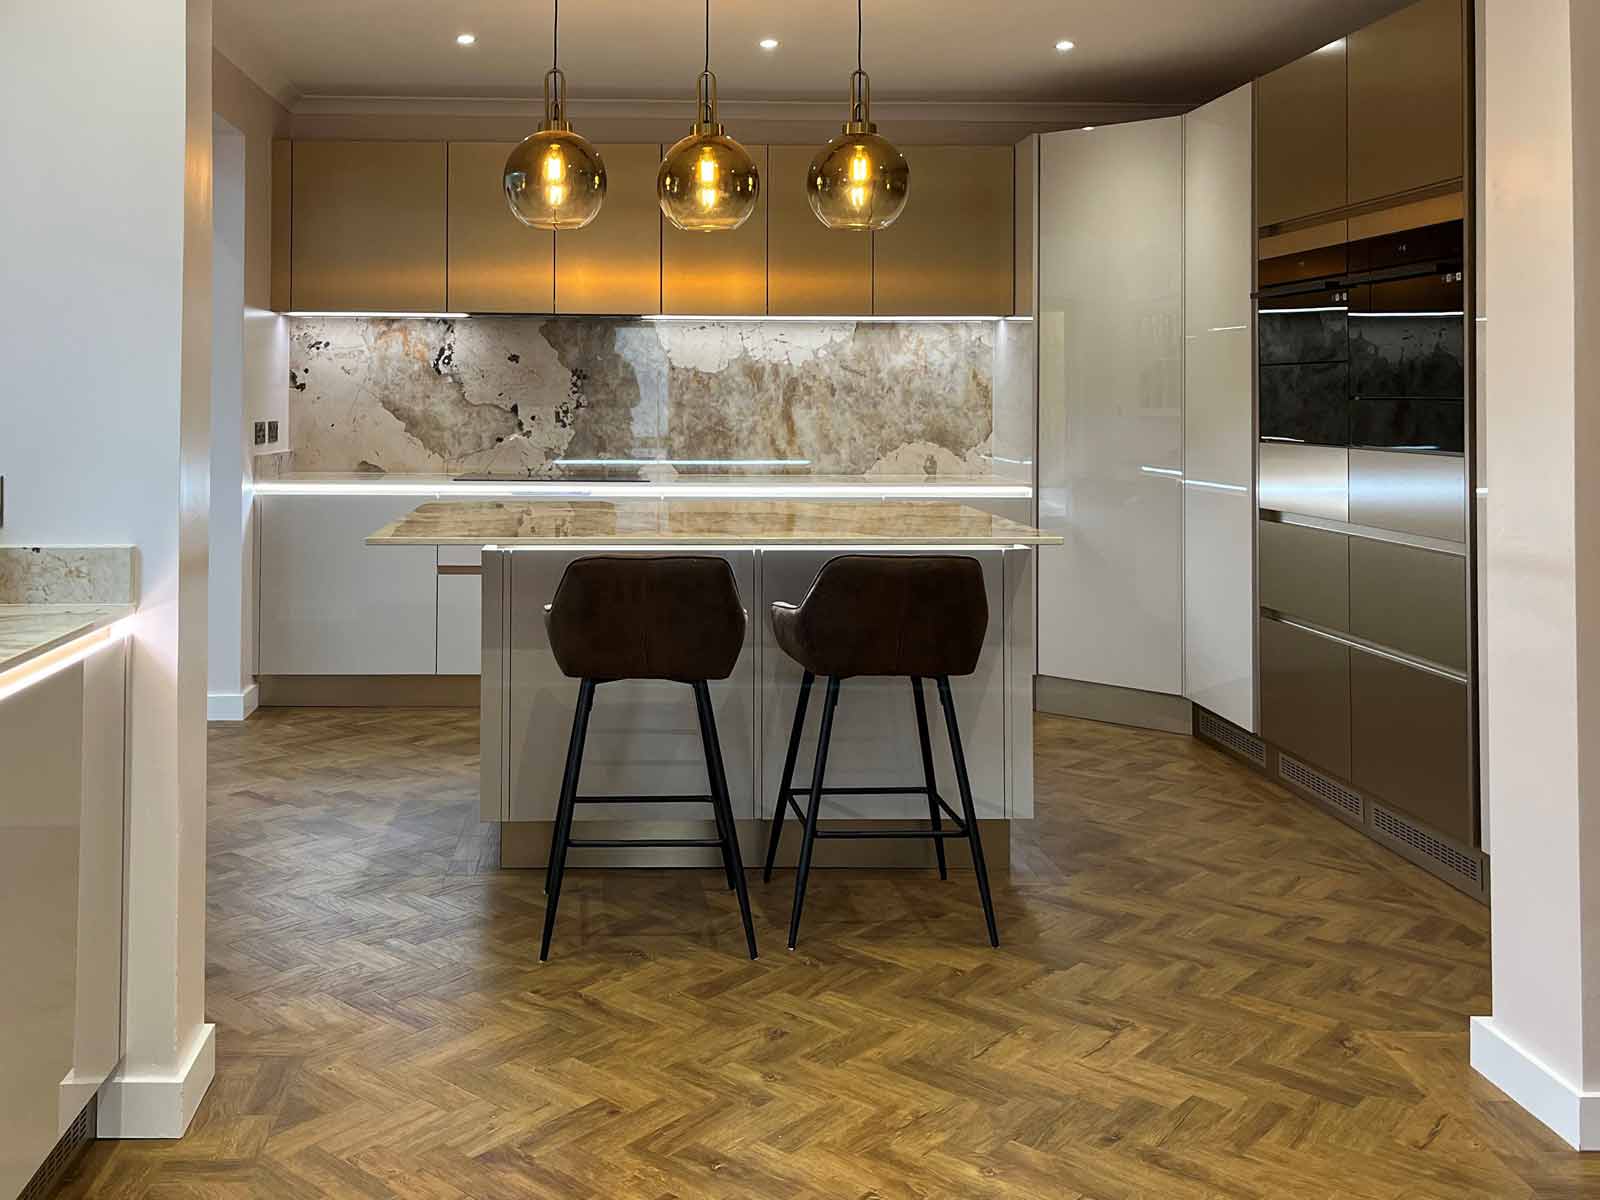 A handleless gloss cashmere kitchen with a wood flooring